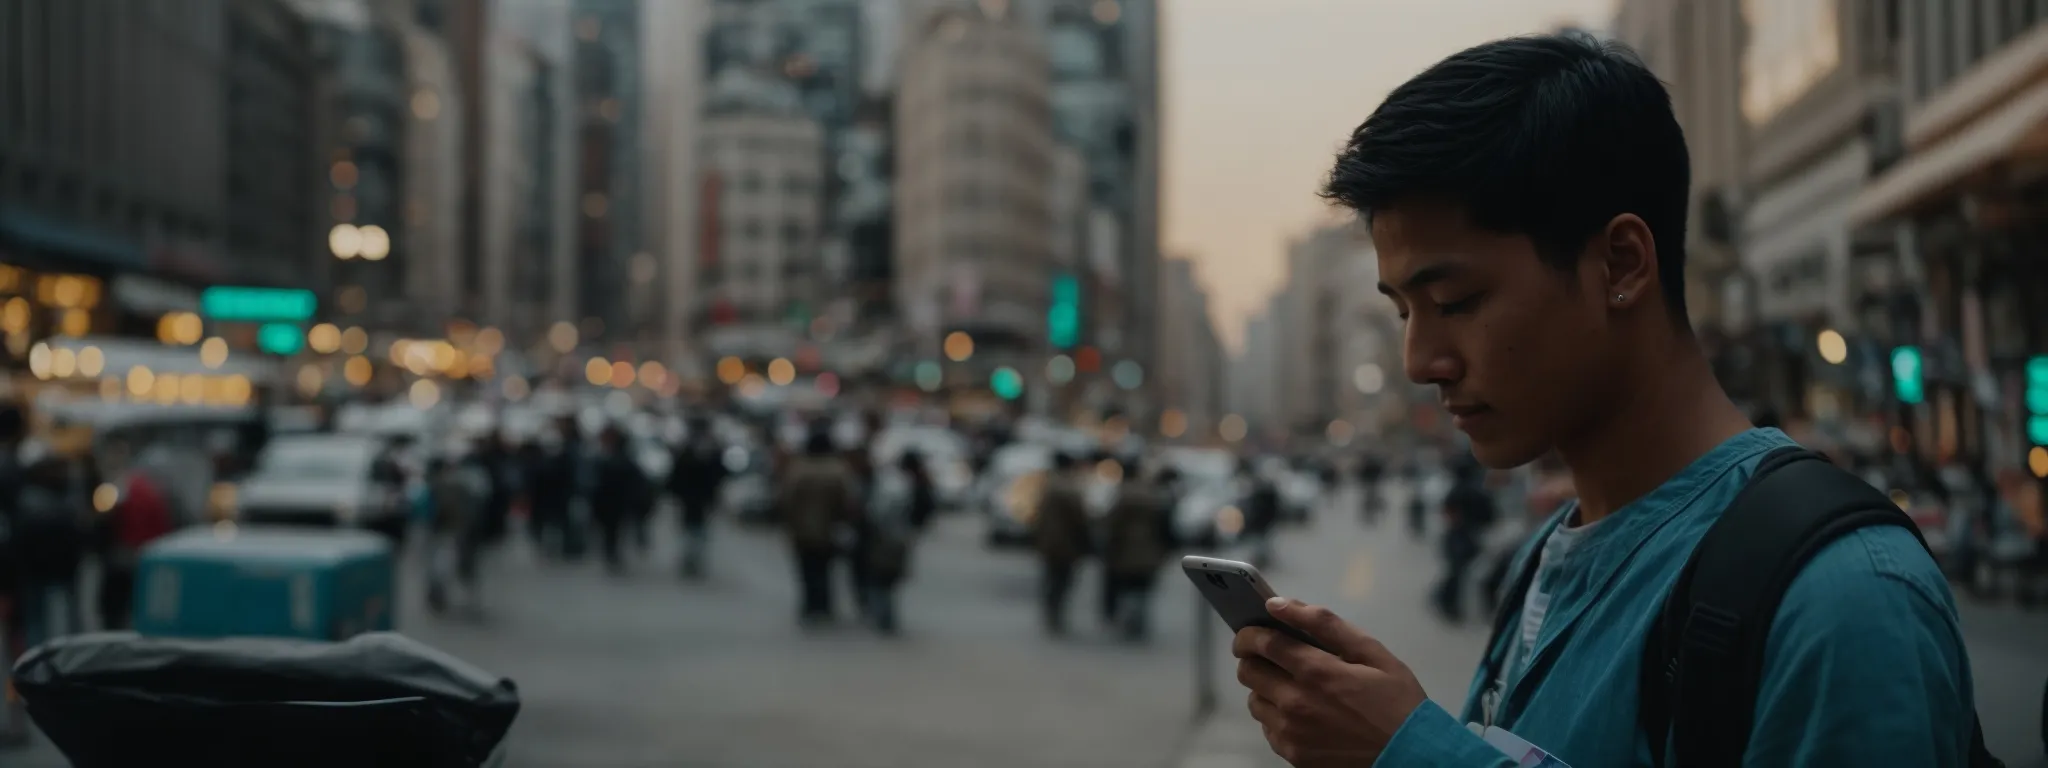 a person looking at a map on a smartphone amidst bustling city streets.